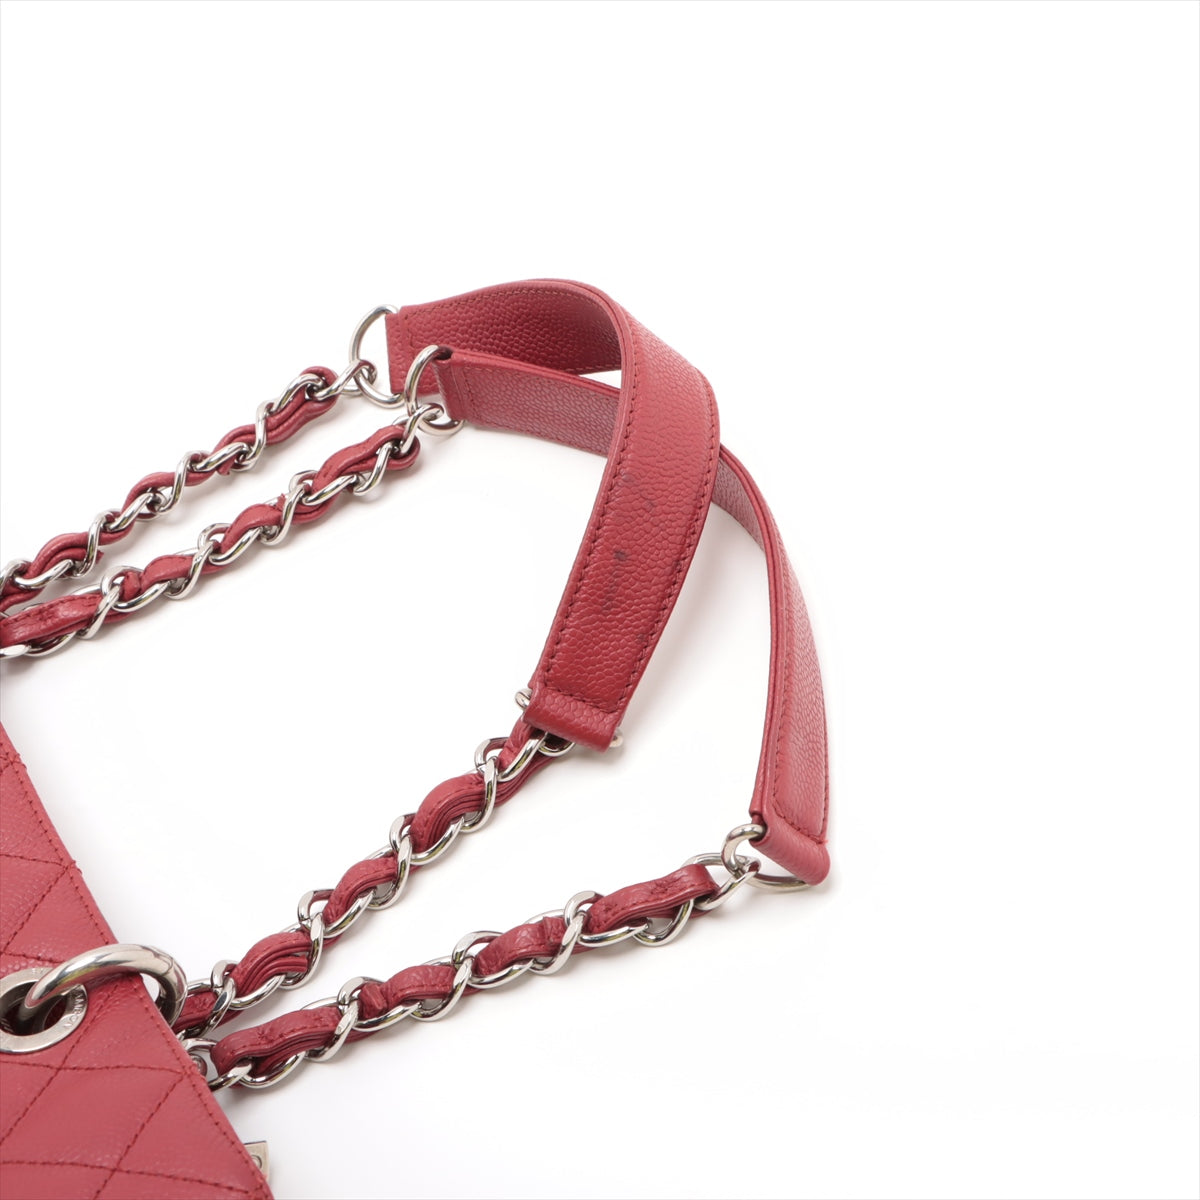 Chanel GST Caviarskin Chain tote bag Red Silver Metal fittings 17035048